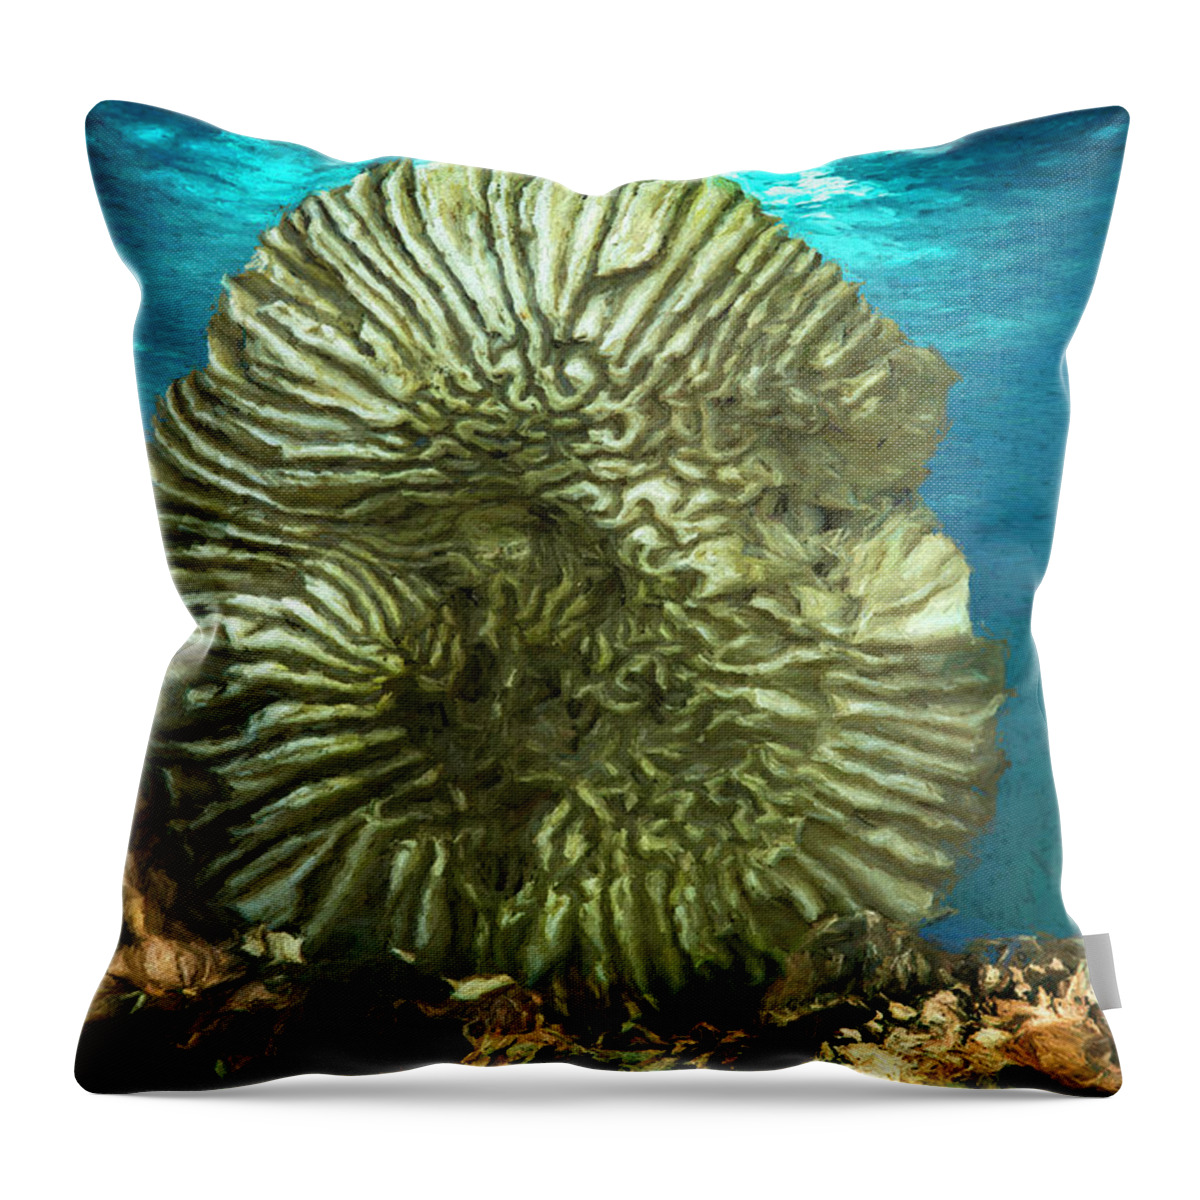 Ocean Throw Pillow featuring the photograph Ocean With Its Life Underground by Pheasant Run Gallery